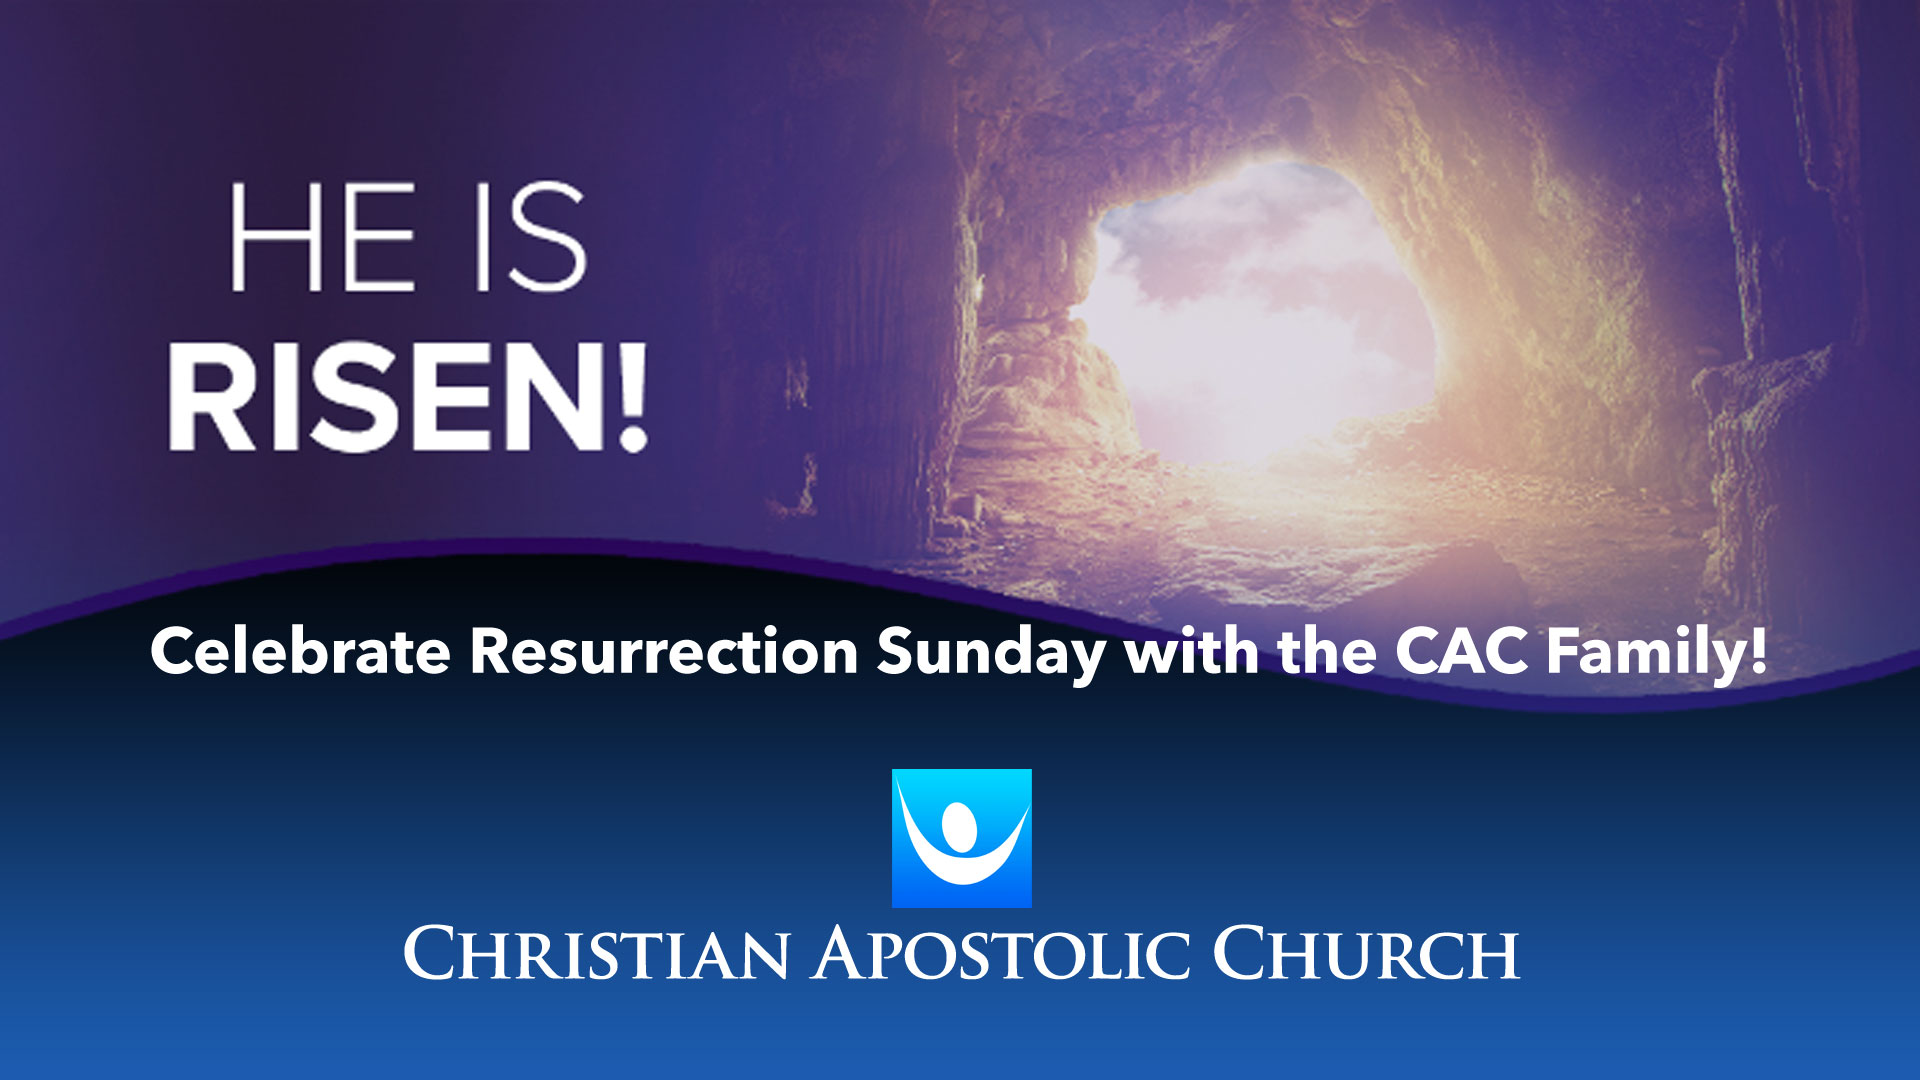 Celebrate Resurrection Sunday (Easter) with the CAC Family!